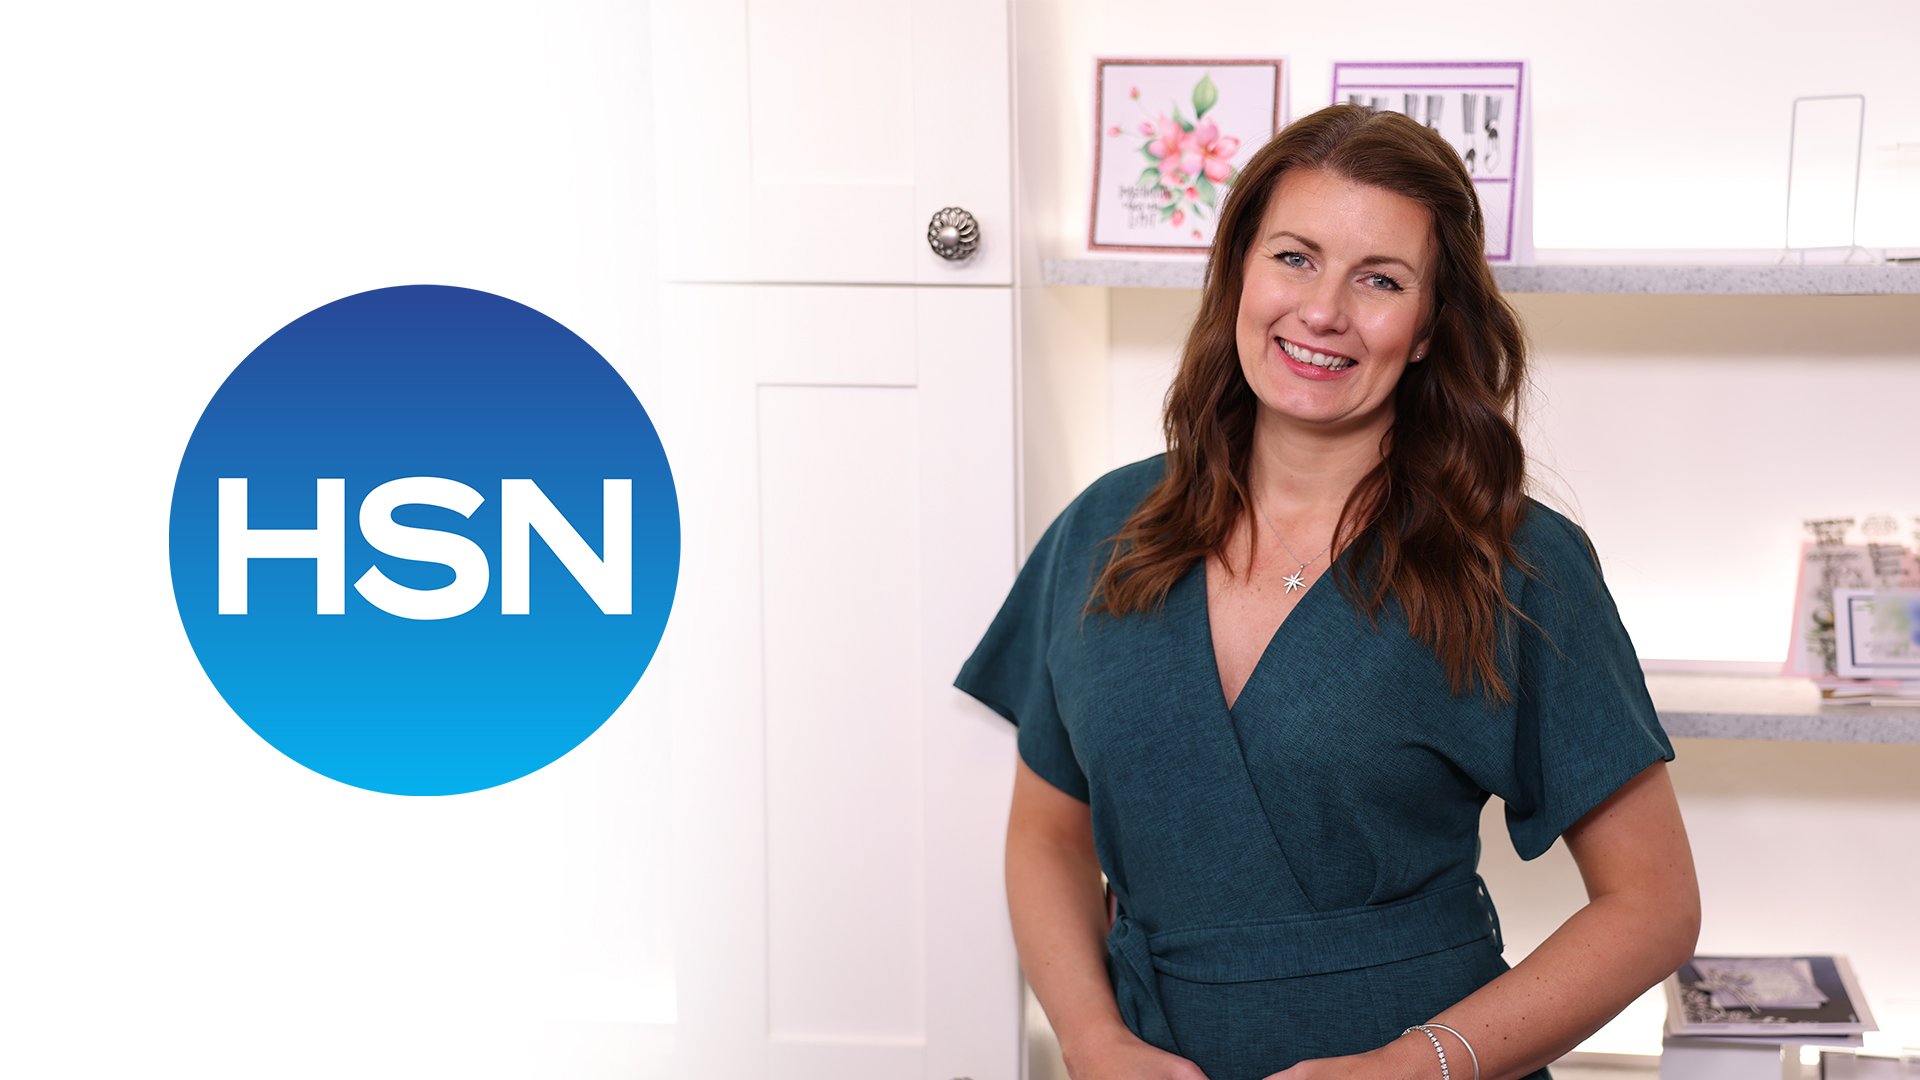 hsn-show-march-28th---join-me-for-my-product-preview-from-my-own-studios